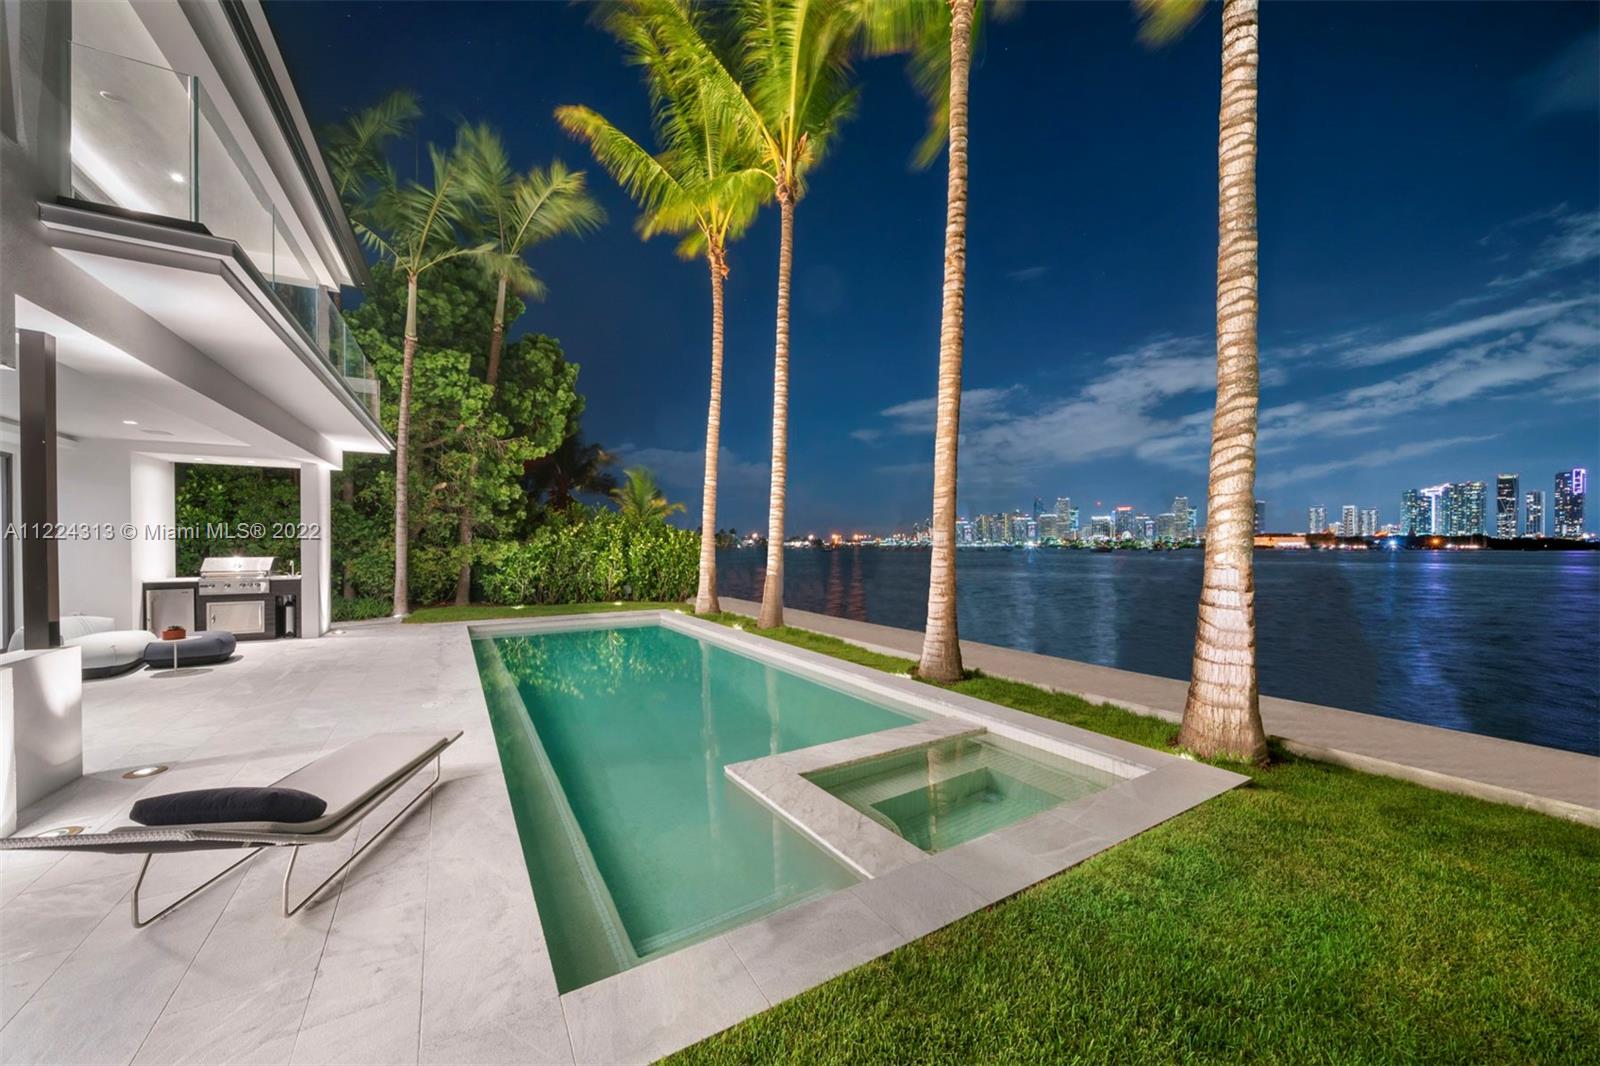 The best skyline view Miami has to offer. Live on the wide-open water and enjoy views of the downtown Miami skyline & the most dramatic sunsets from this contemporary waterfront residence. Enter through a beautiful courtyard to an open layout with breathtaking views from every room. No detail was spared in luxurious finishes throughout this spacious 2 story, 7 bedroom, 7 full bathroom and 1 half bathroom estate. The outdoors are an entertainer’s oasis complete with a private dock, summer kitchen and lounge/dining areas to bask in the views and Miami sun. Complete with a 2 car garage, guest house with its own entrance, a gourmet kitchen overlooking the water, principal suite with a massive walk-in closet, spa-like master bathroom & an expansive balcony offering panoramic views.